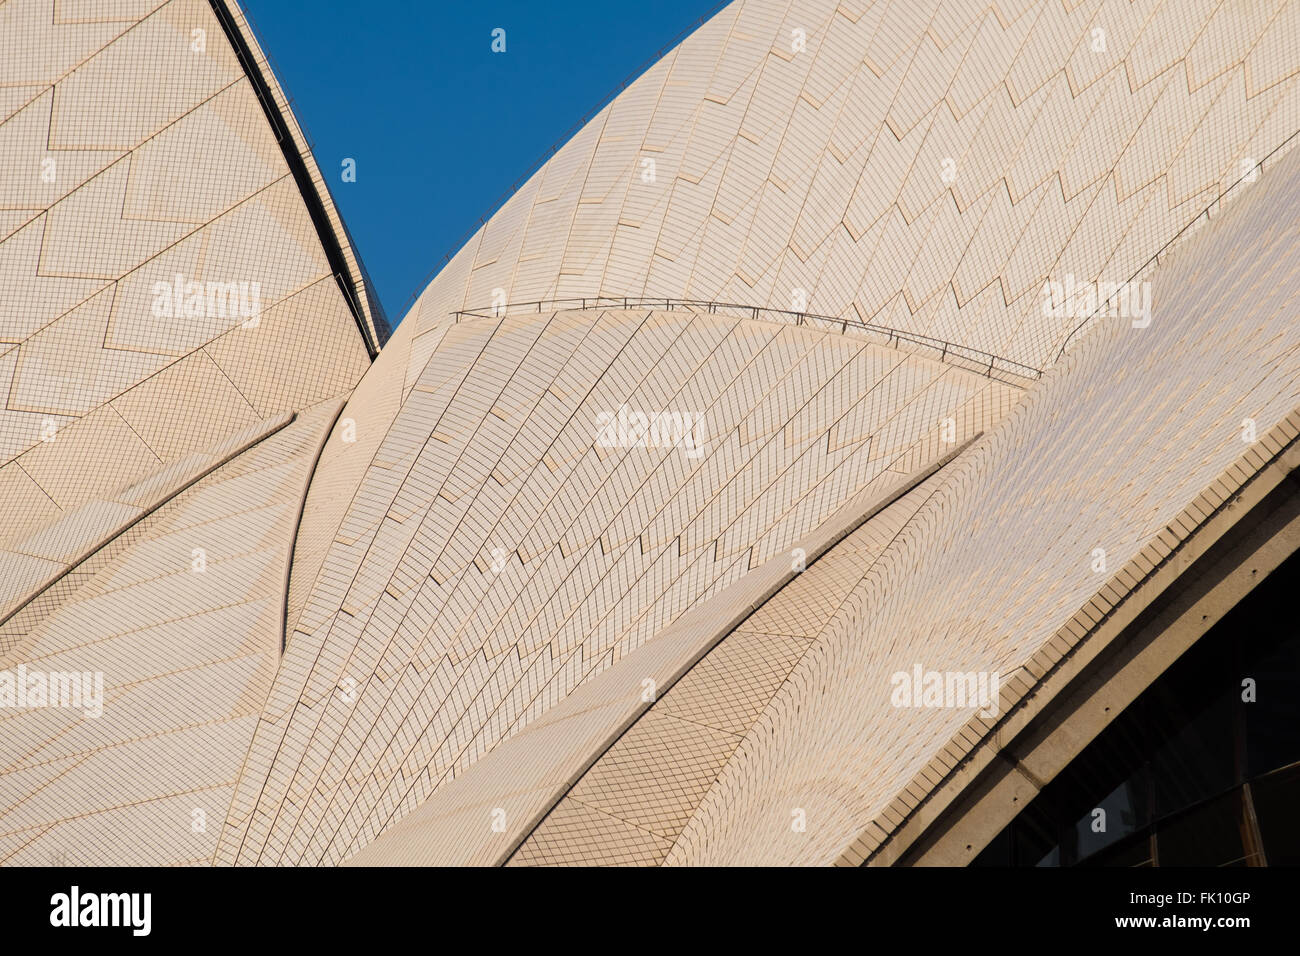 The ceramic tiled roof of the Sydney Opera House Stock Photo